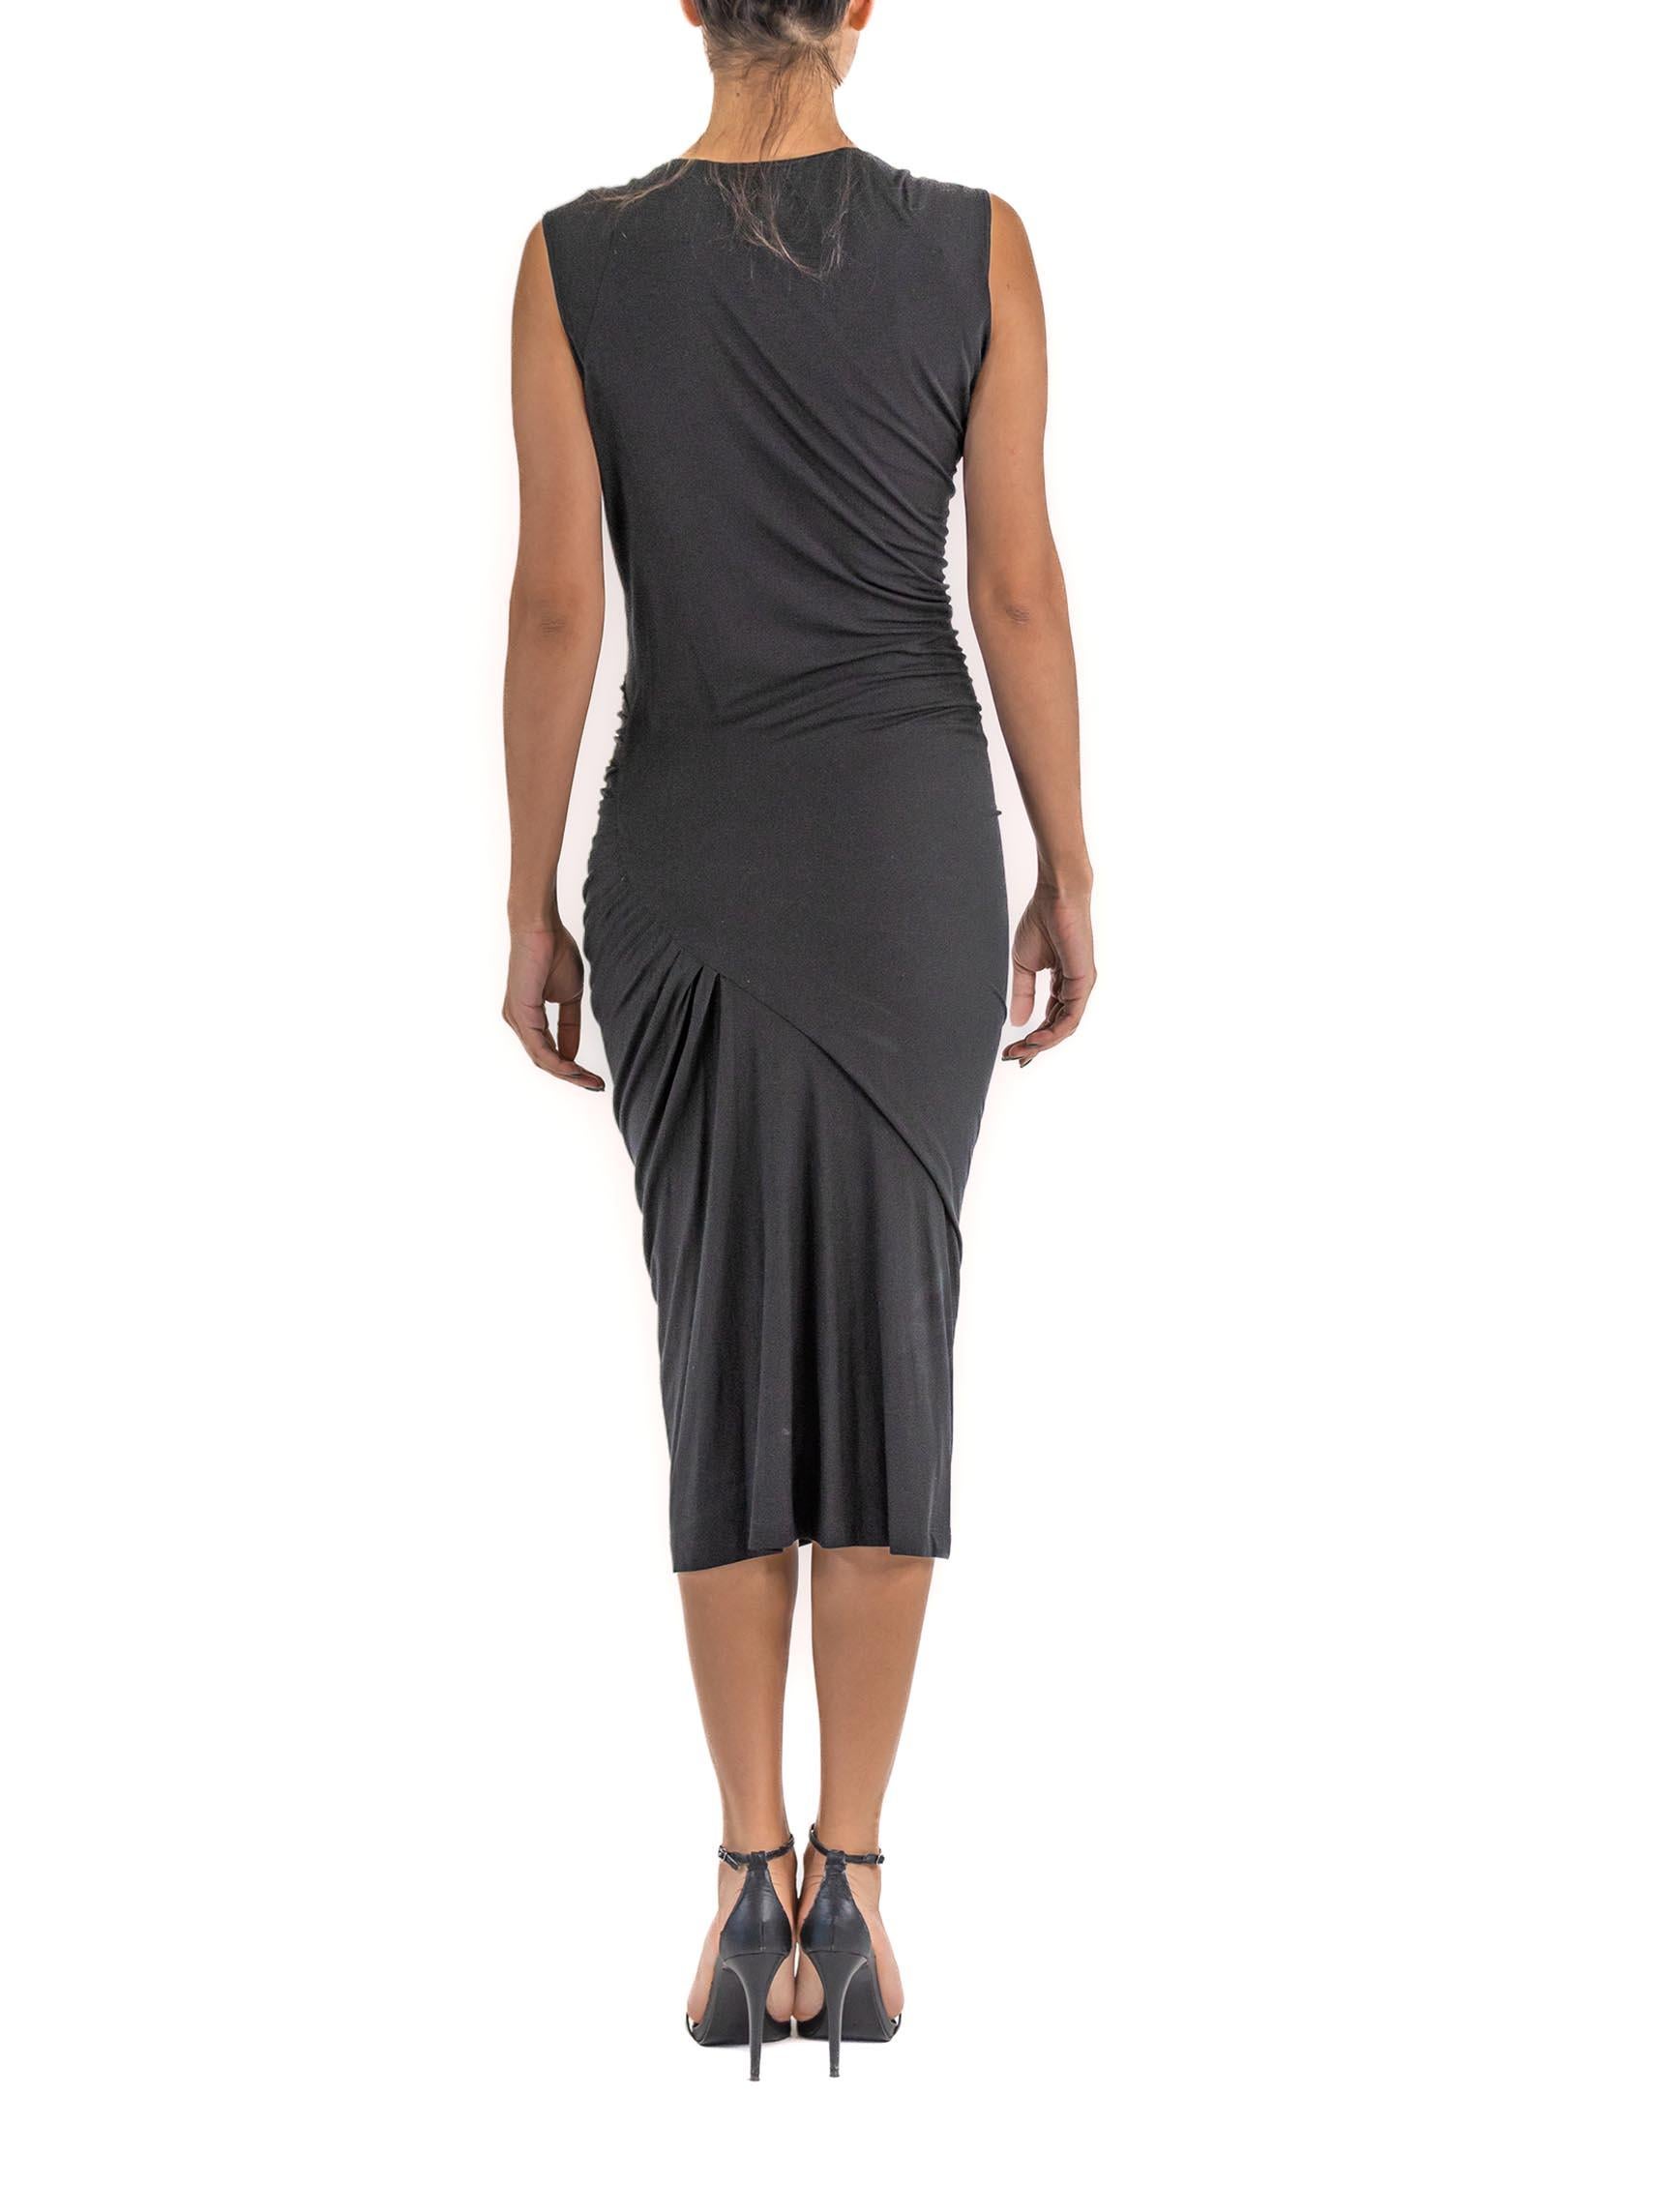 2000S DONNA KARAN Black Rayon Jersey Side Ruched Long Gown For Sale 3